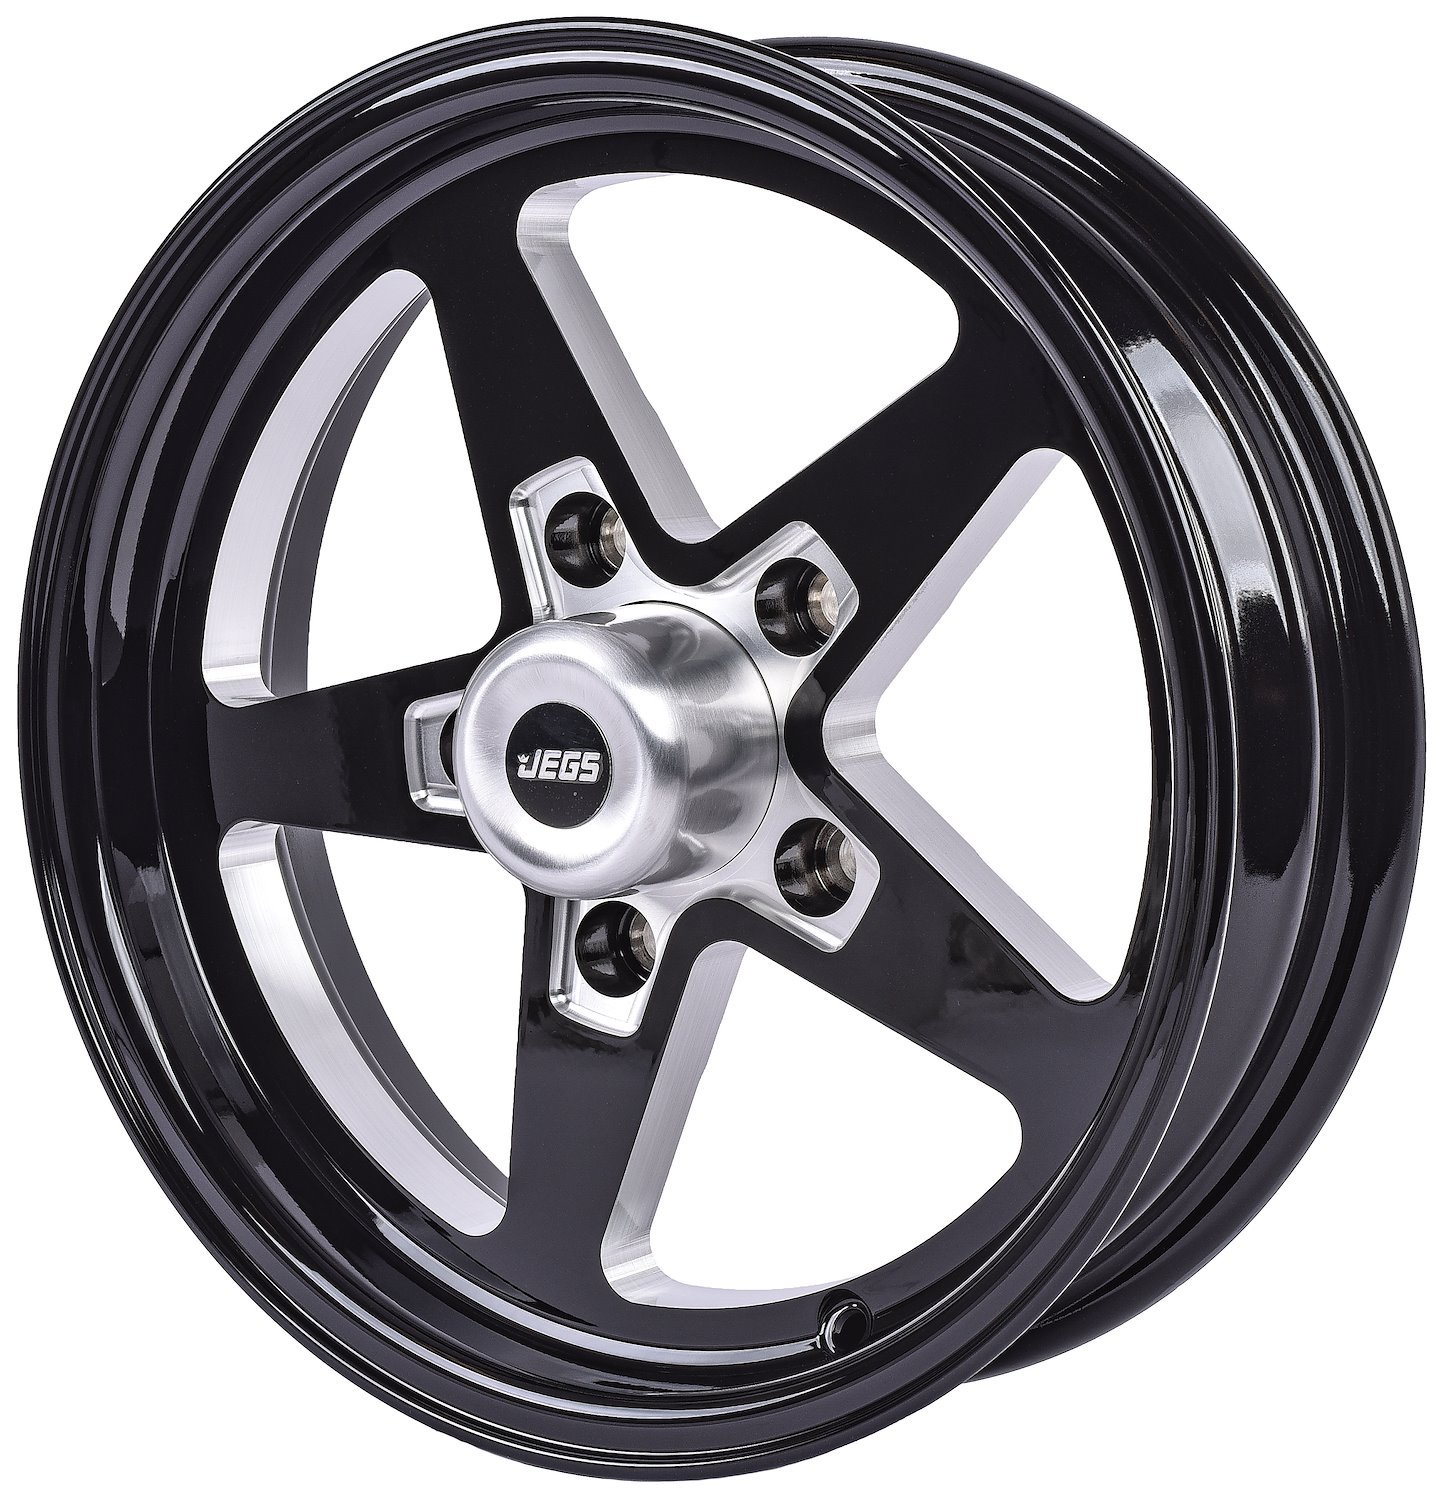 JEGS 681252: SSR Star Wheel [15" x 4"] | Bolt Pattern: 5 x 5.00" | Black  Powder Coat | Includes center cap | DOT Approved | Back Spacing: 1.75" |  Offset: -19 mm | Each - JEGS